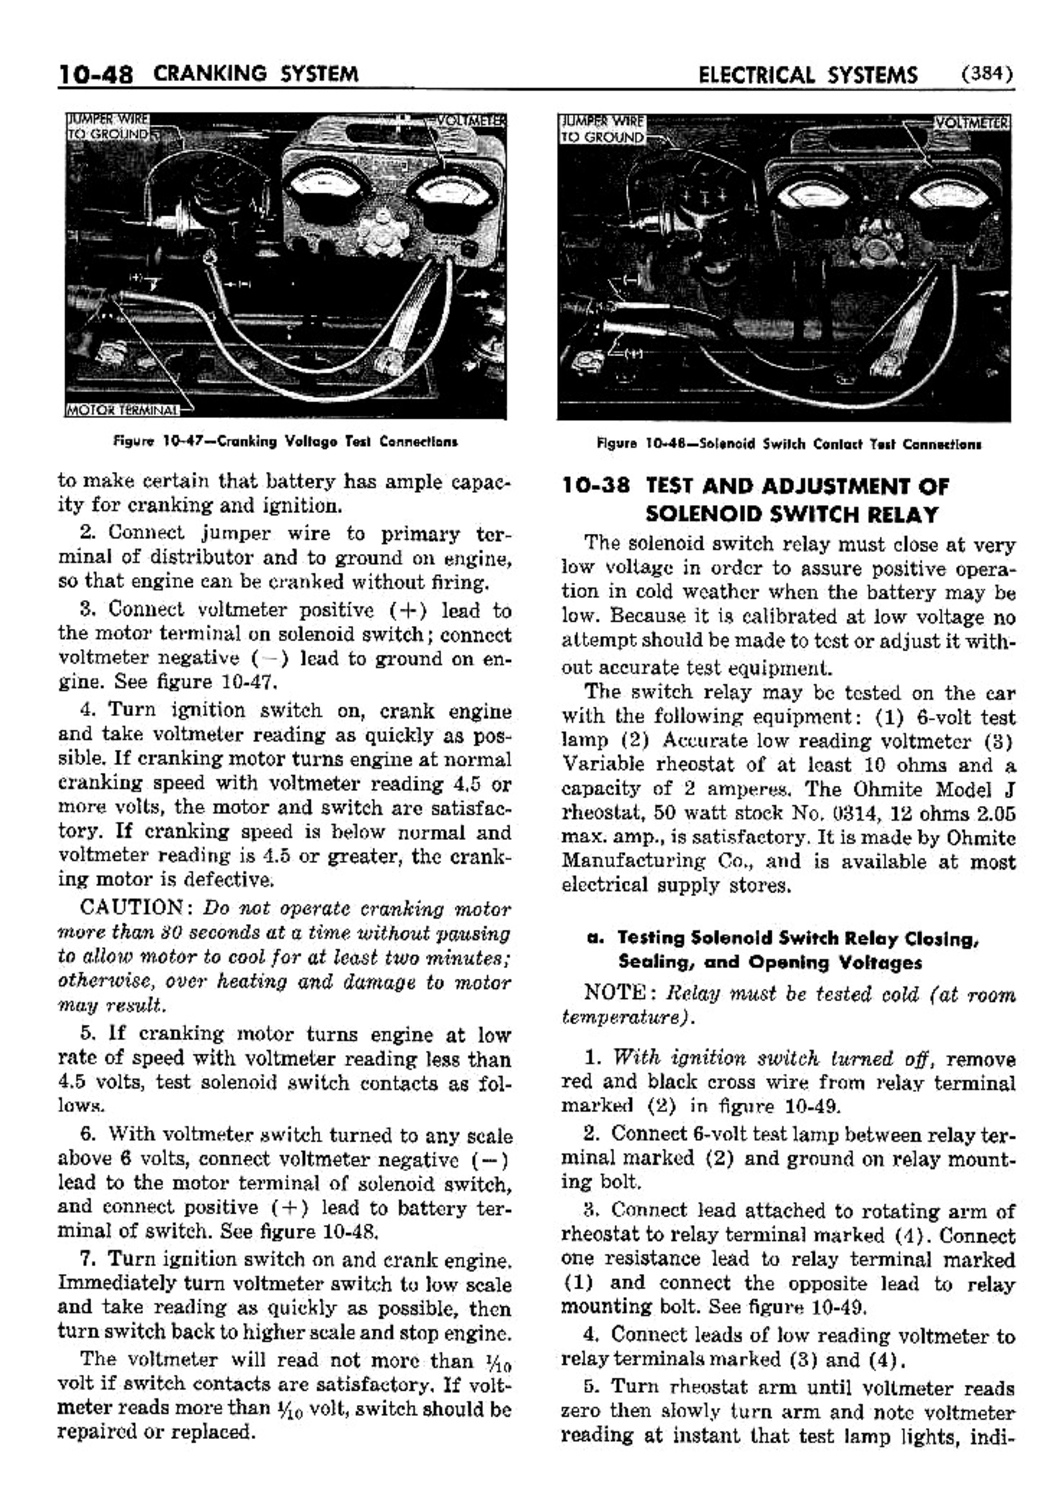 n_11 1952 Buick Shop Manual - Electrical Systems-048-048.jpg